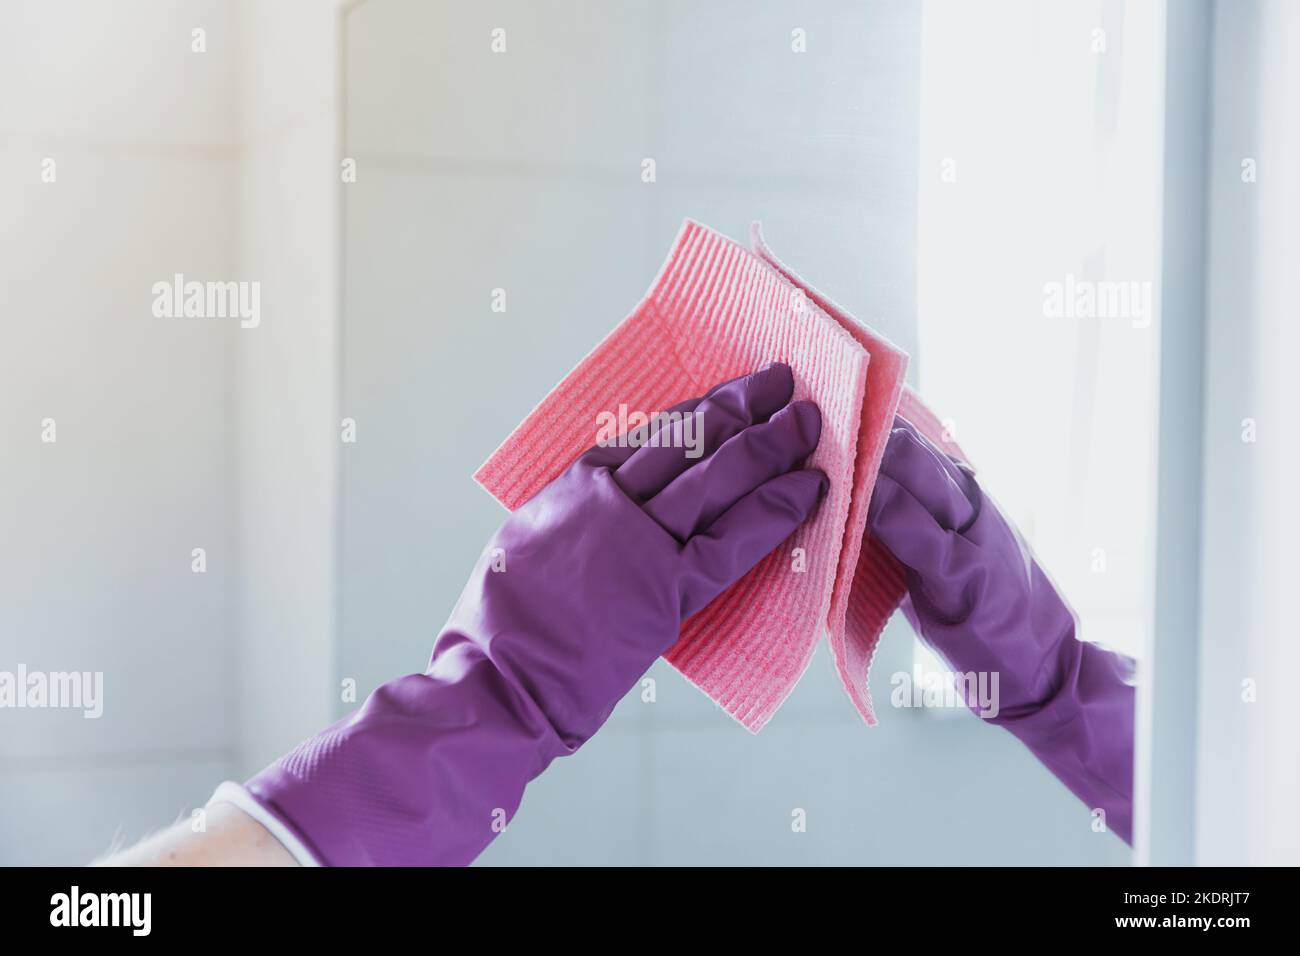 https://c8.alamy.com/comp/2KDRJT7/cropped-view-of-housekeeper-woman-hand-in-purple-rubber-gloves-polishing-mirror-with-pink-cloth-rag-cleaner-while-cleaning-bathroom-at-home-housekeeping-and-cleaning-service-clean-house-cleanliness-2KDRJT7.jpg